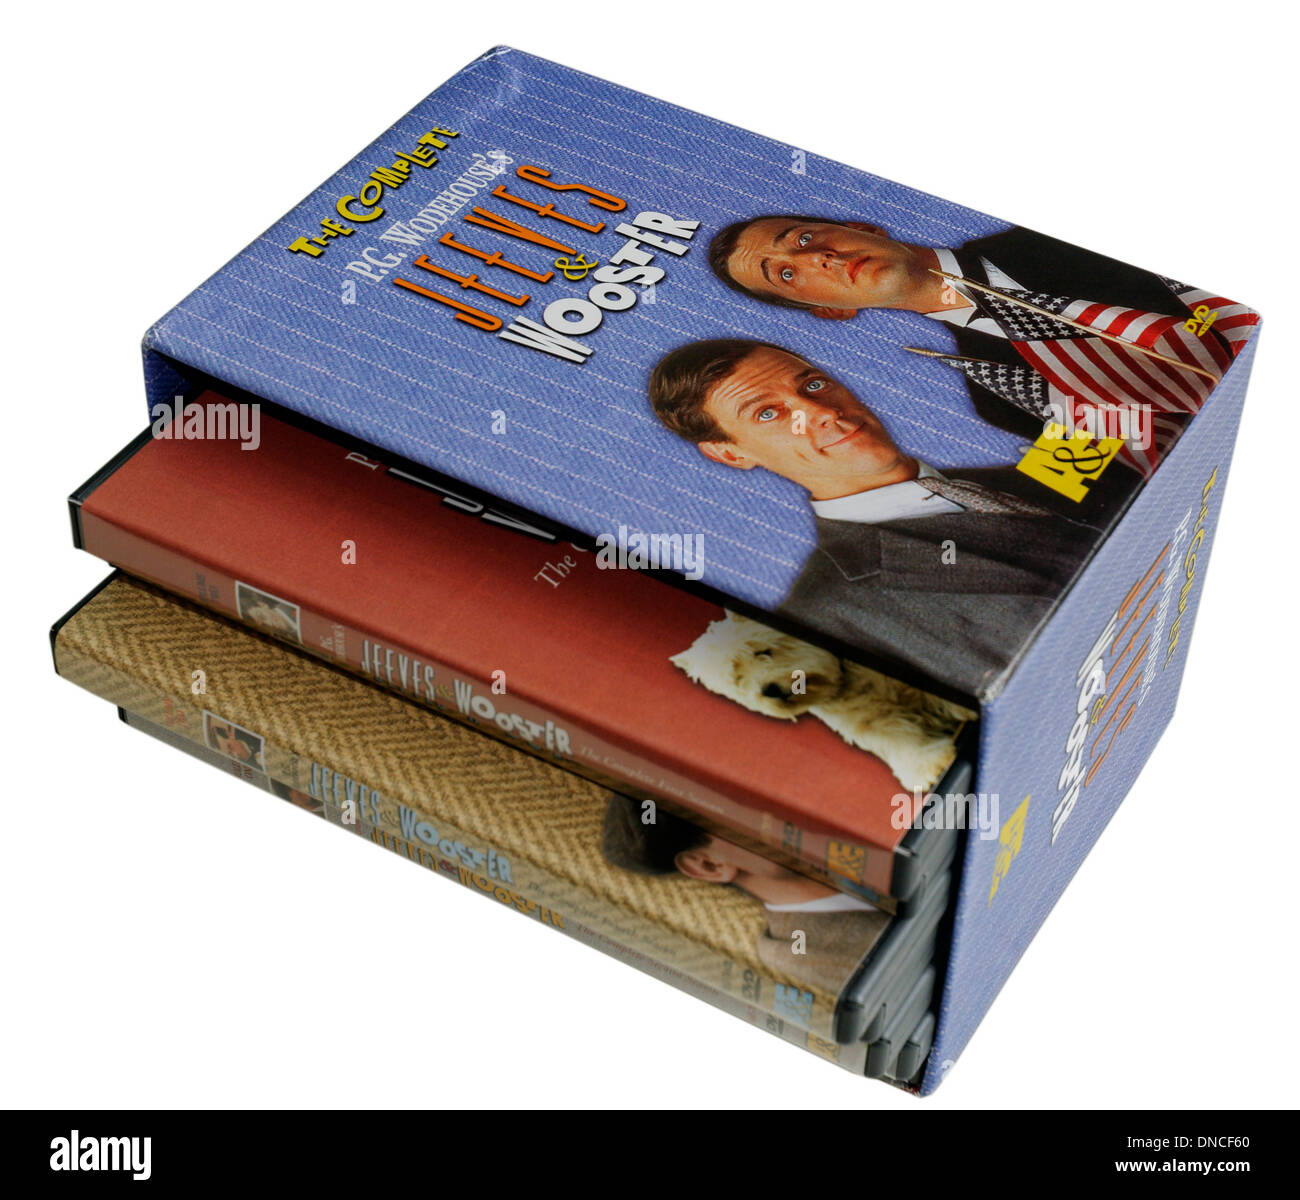 Jeeves and Wooster DVD set Stock Photo - Alamy